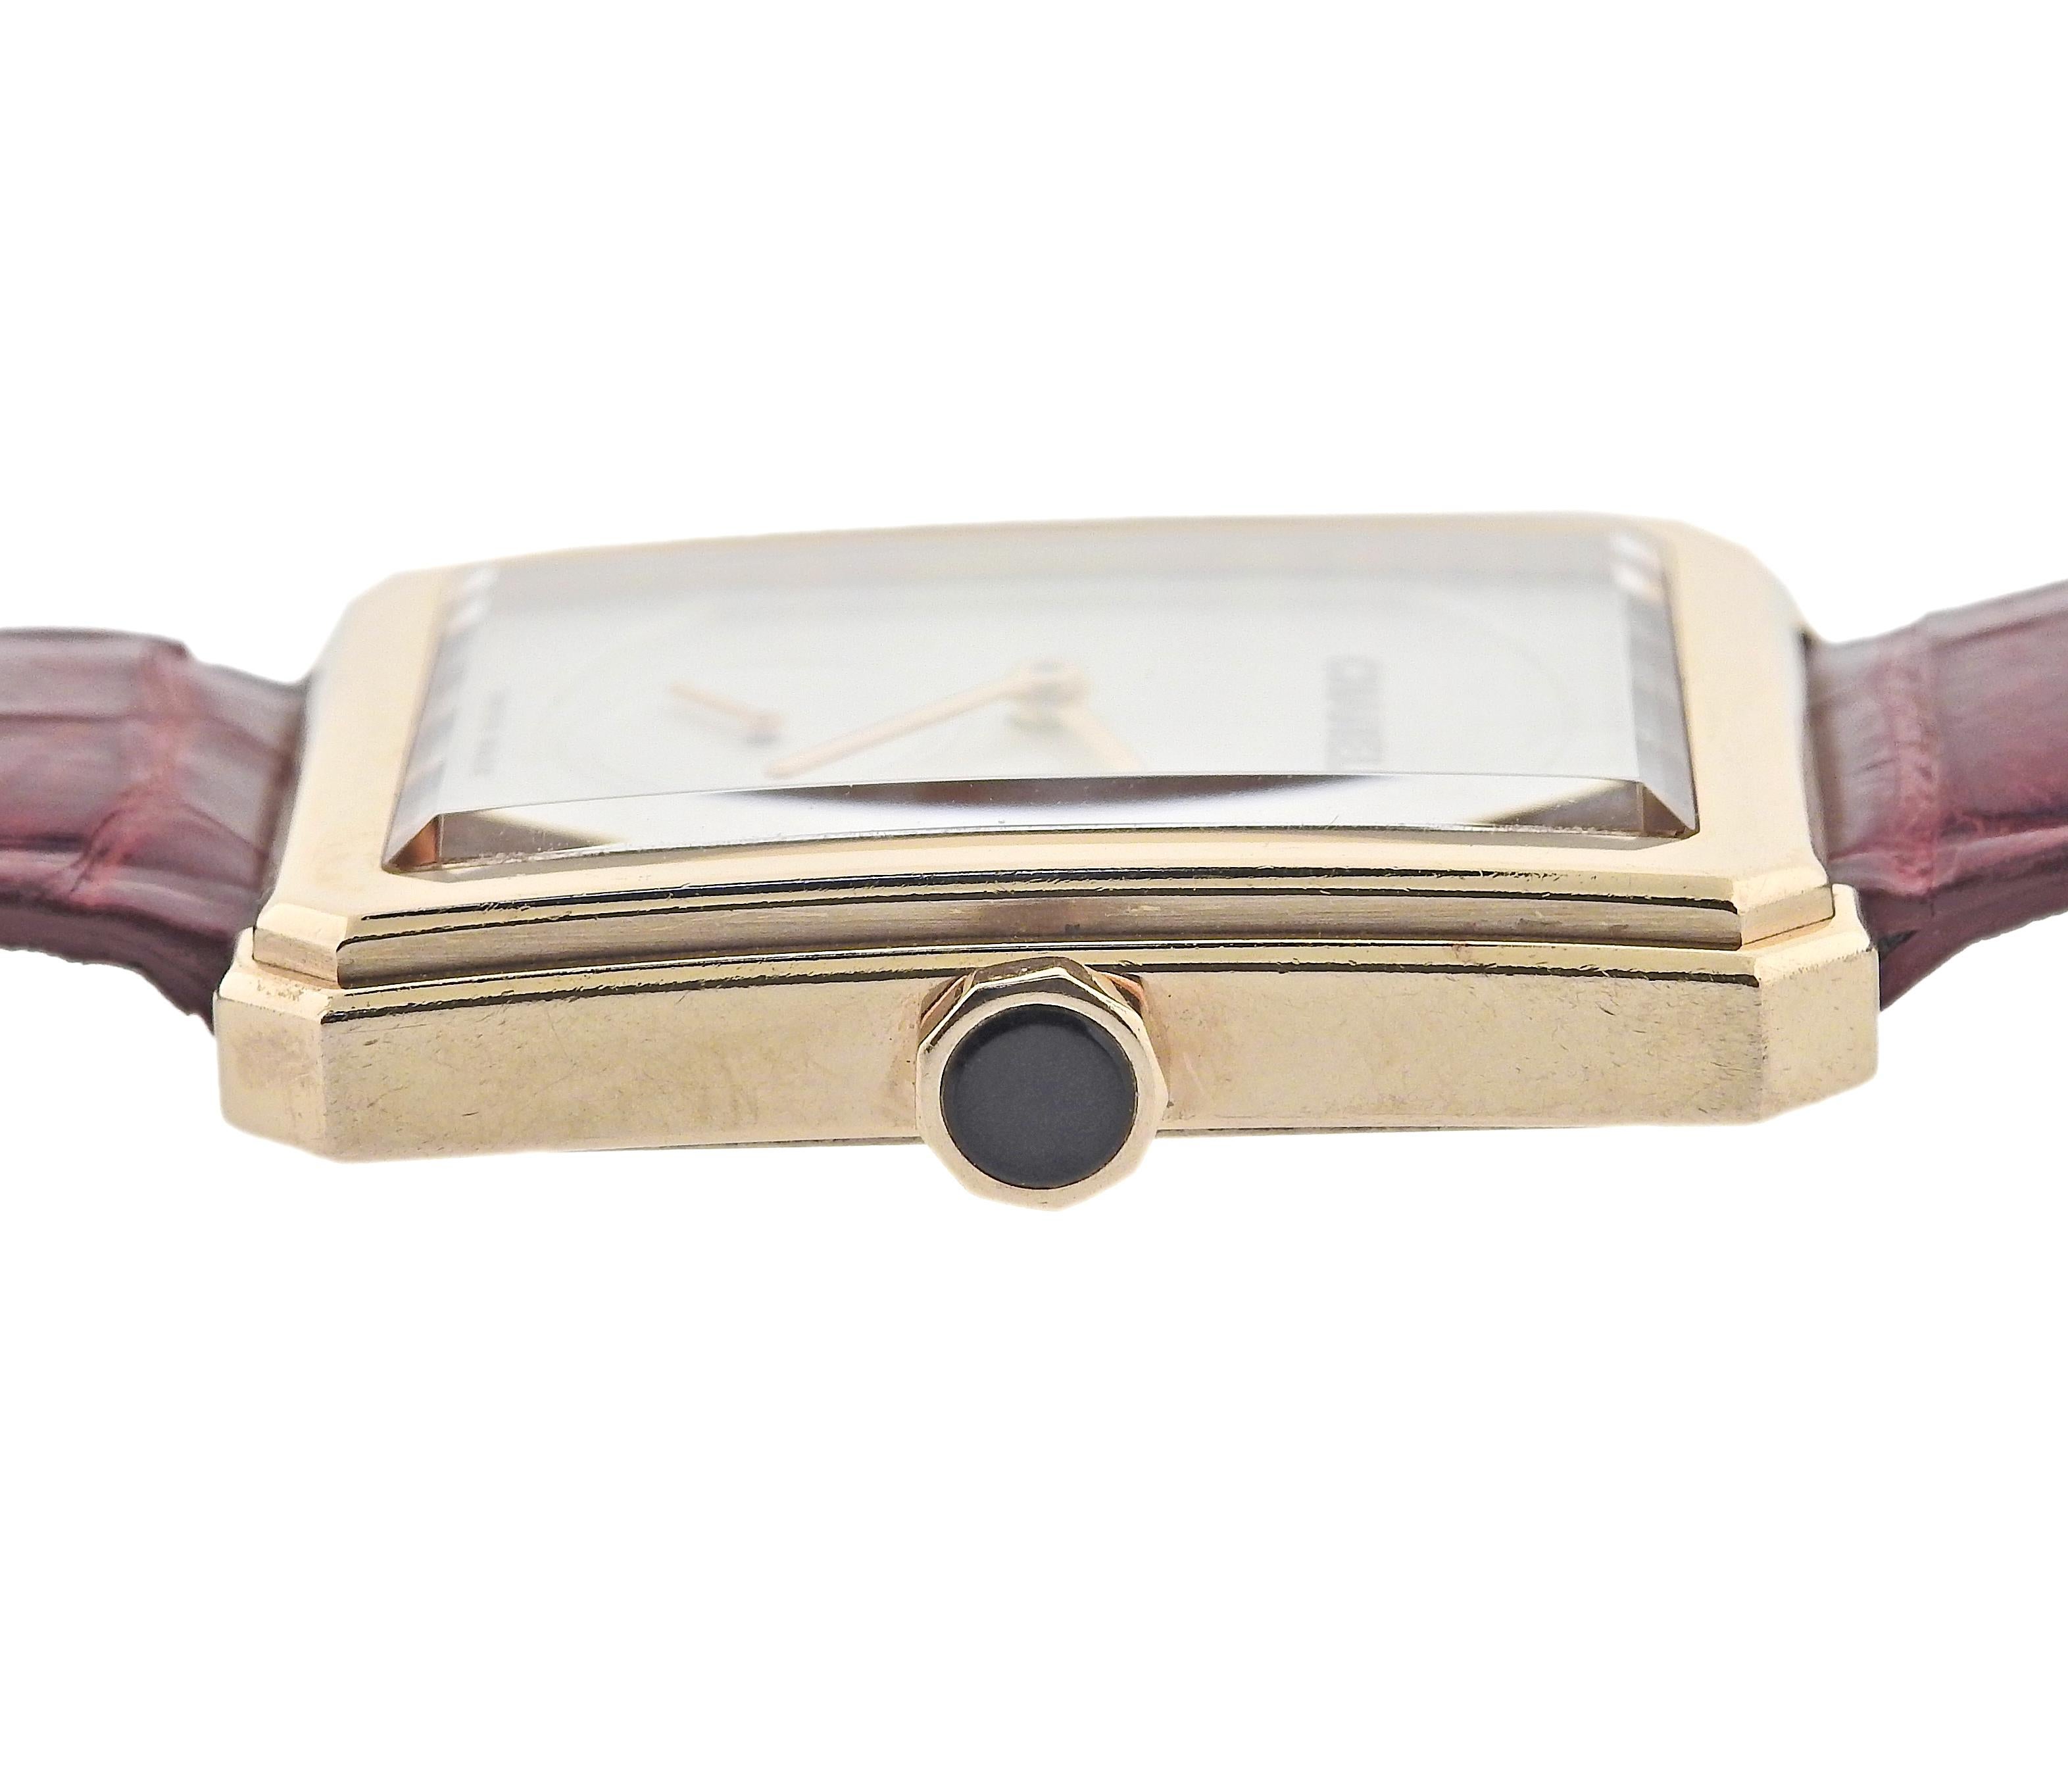 Chanel 18K rose gold Boyfriend manual ladies watch Reference: H6589. Watch case is measured: 37mm x 28.6mm. Watch is in great condition with minor signs of wear on case and case back. Original band and buckle, comes with box and papers. Retail value